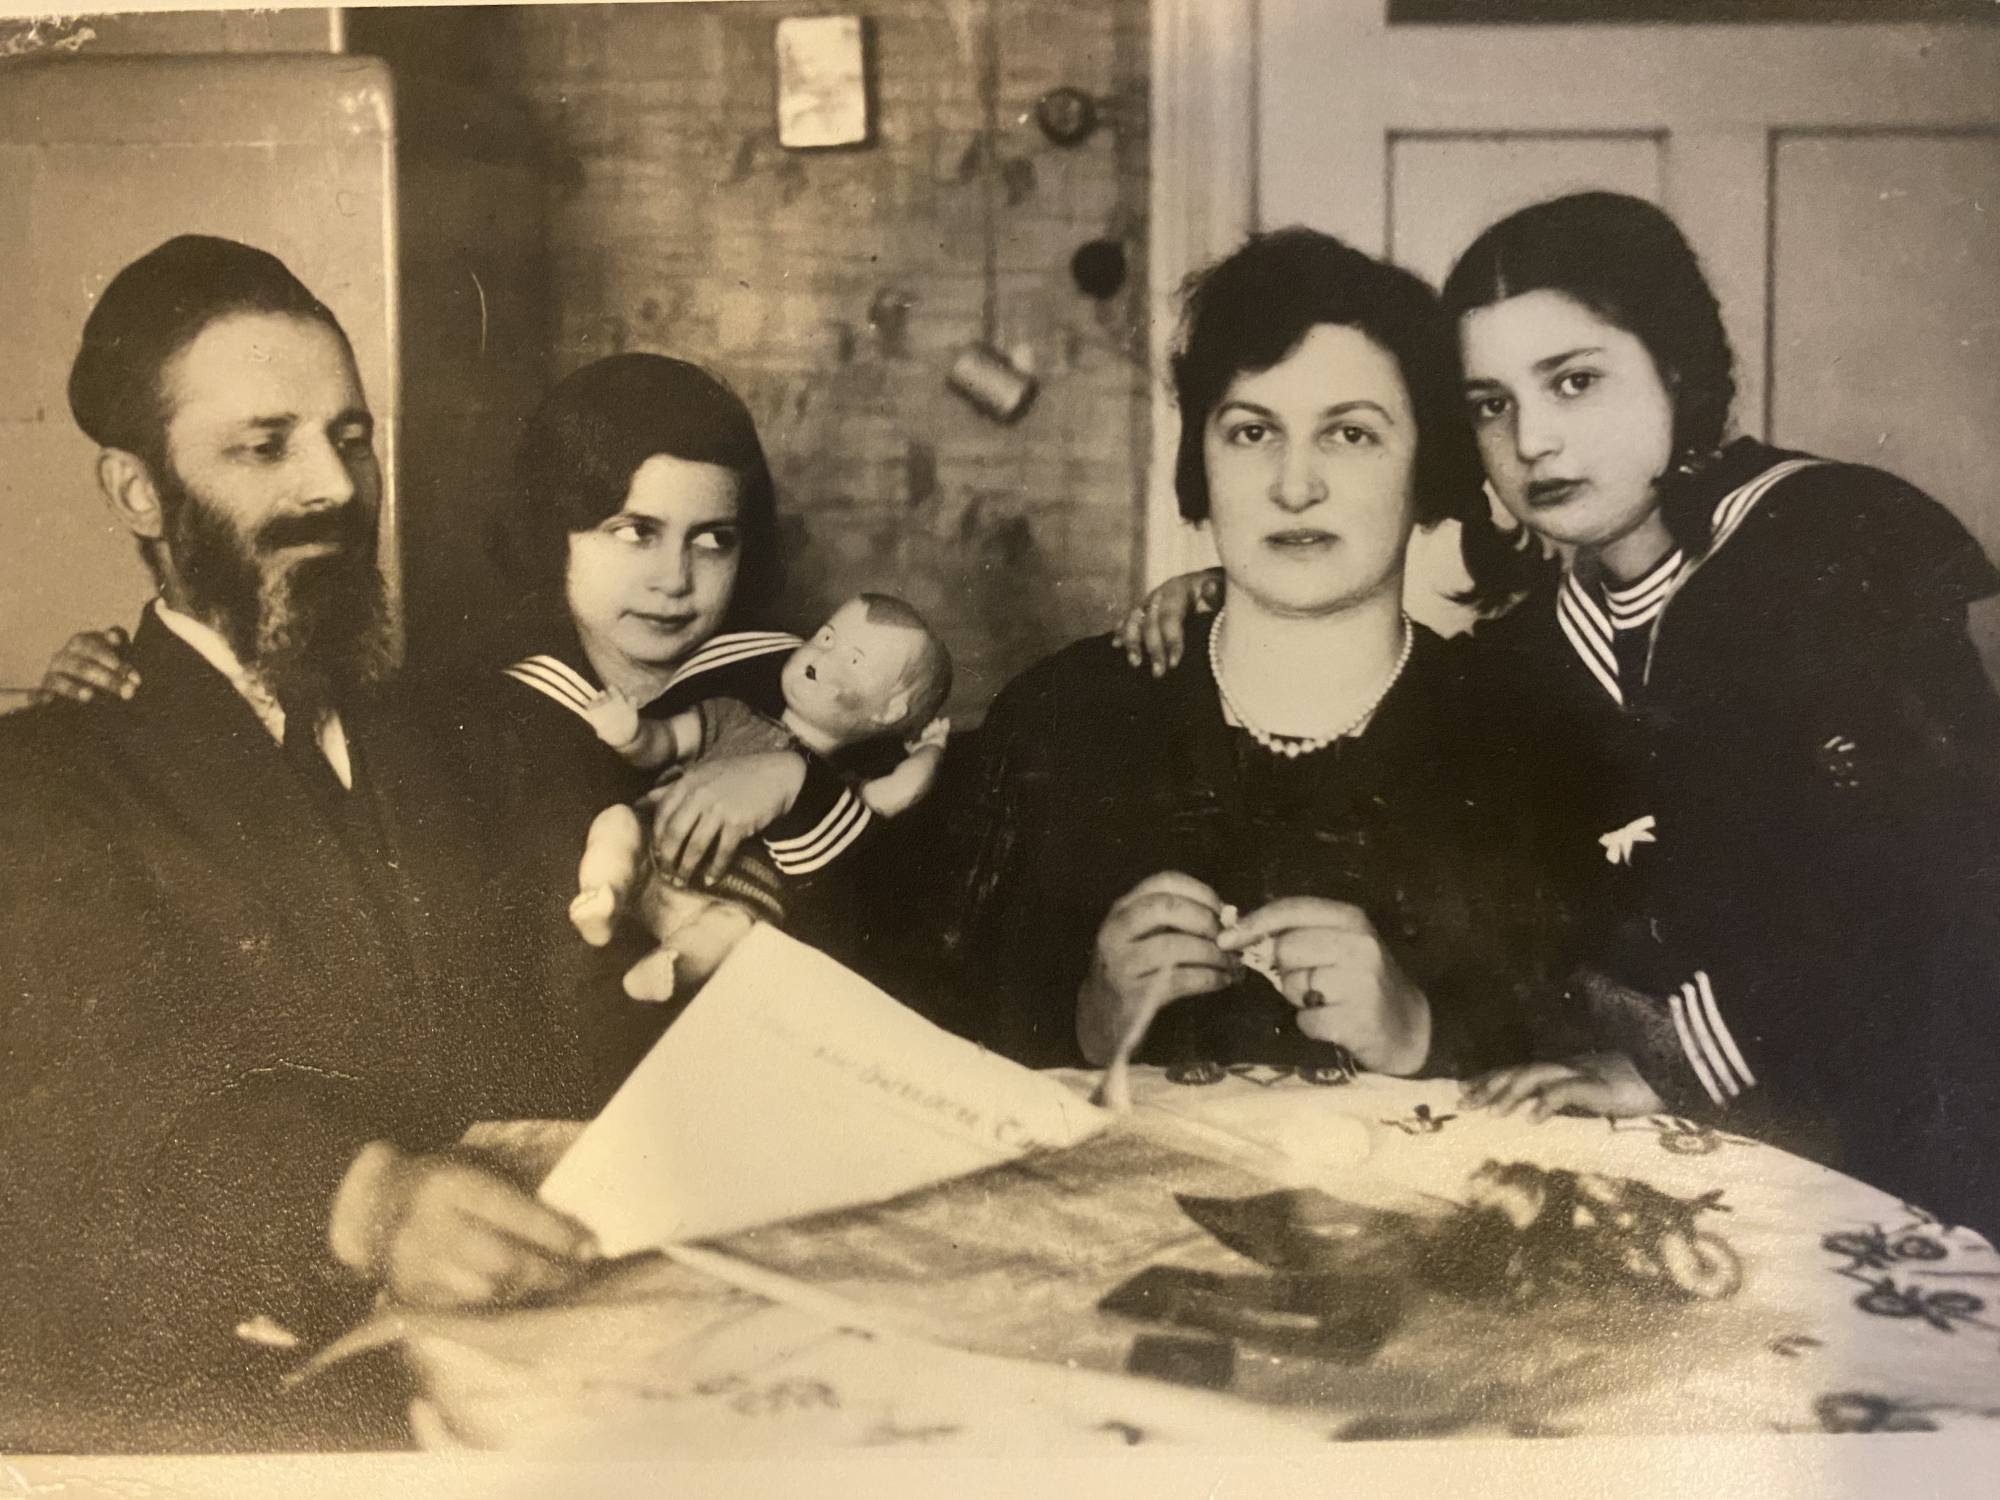 A photograph of Rischel Friedmann (far right) and her family at their home in the city that is now Klaipeda, Lithuania, but was then under Soviet rule. | COURTESY OF AARON KOTLER